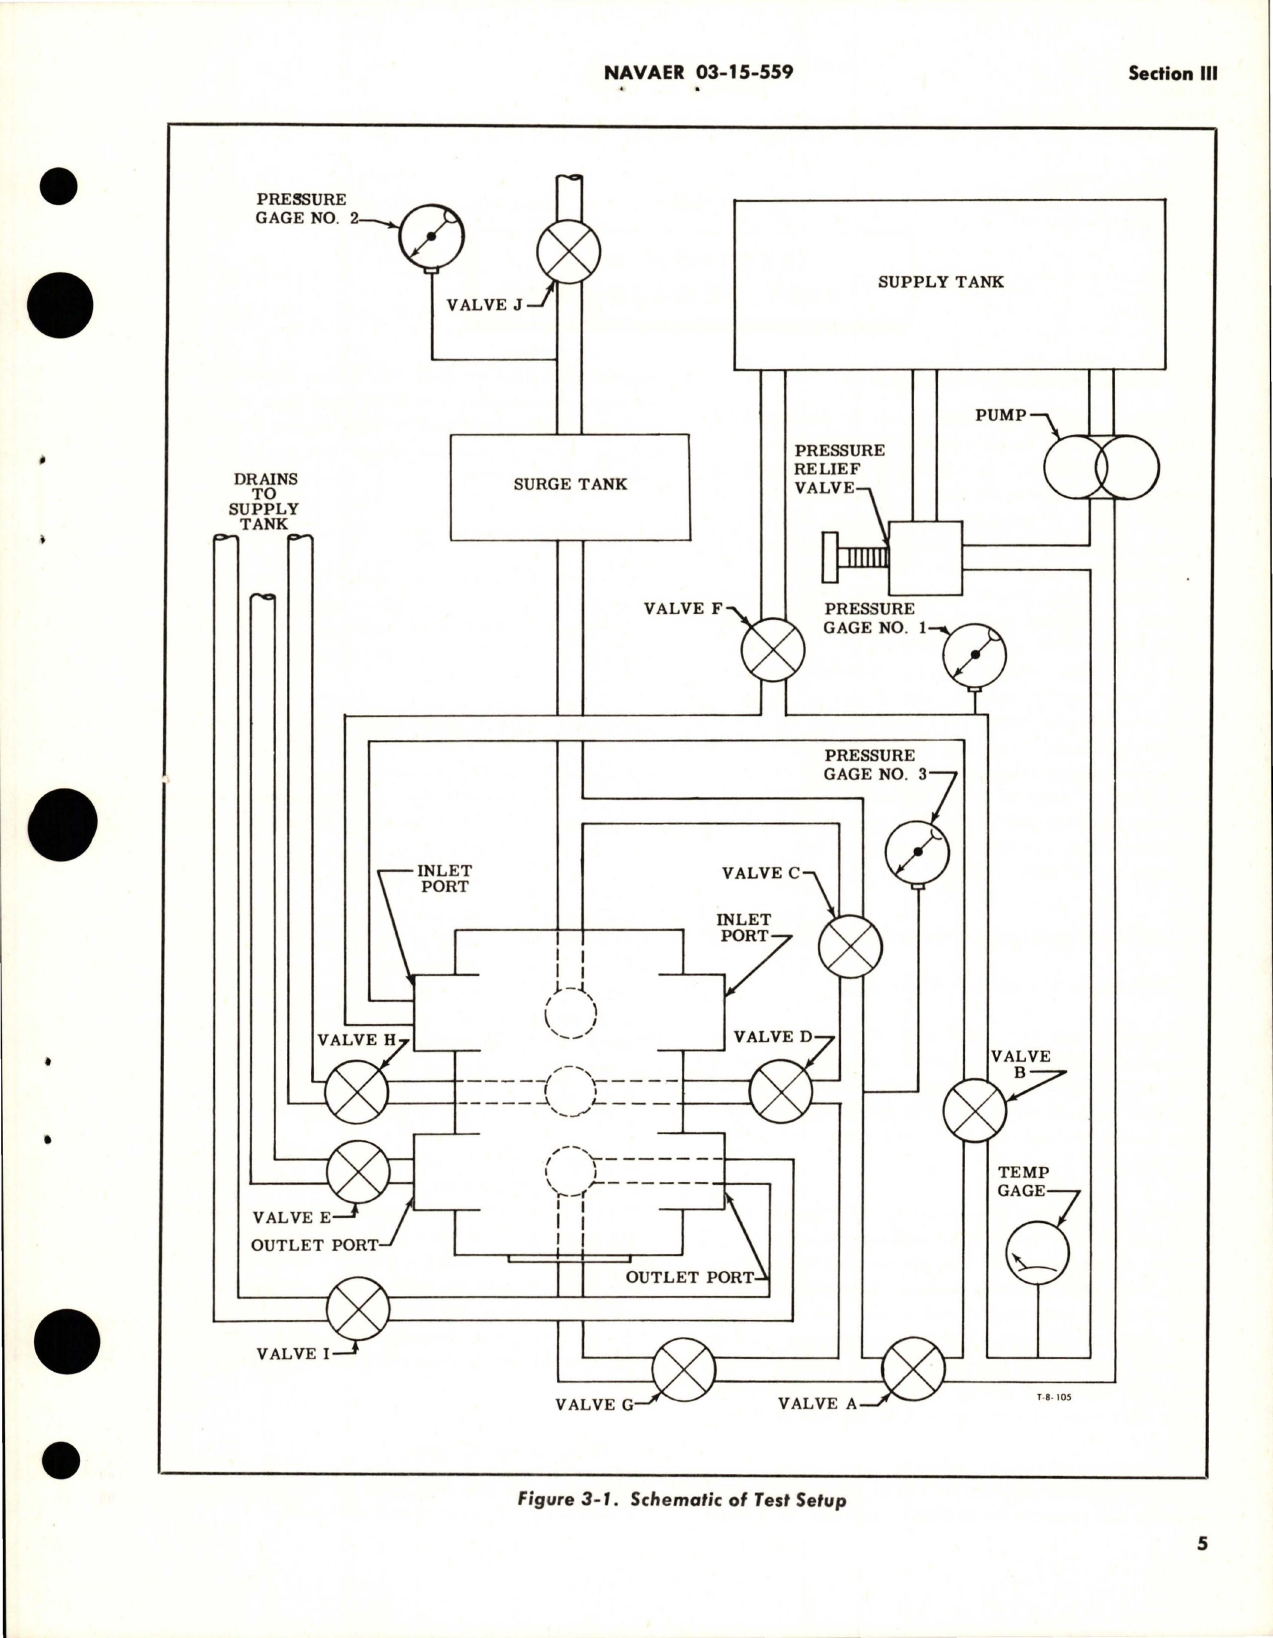 Sample page 9 from AirCorps Library document: Overhaul Instructions for Thermostatic Temperature Control Valves